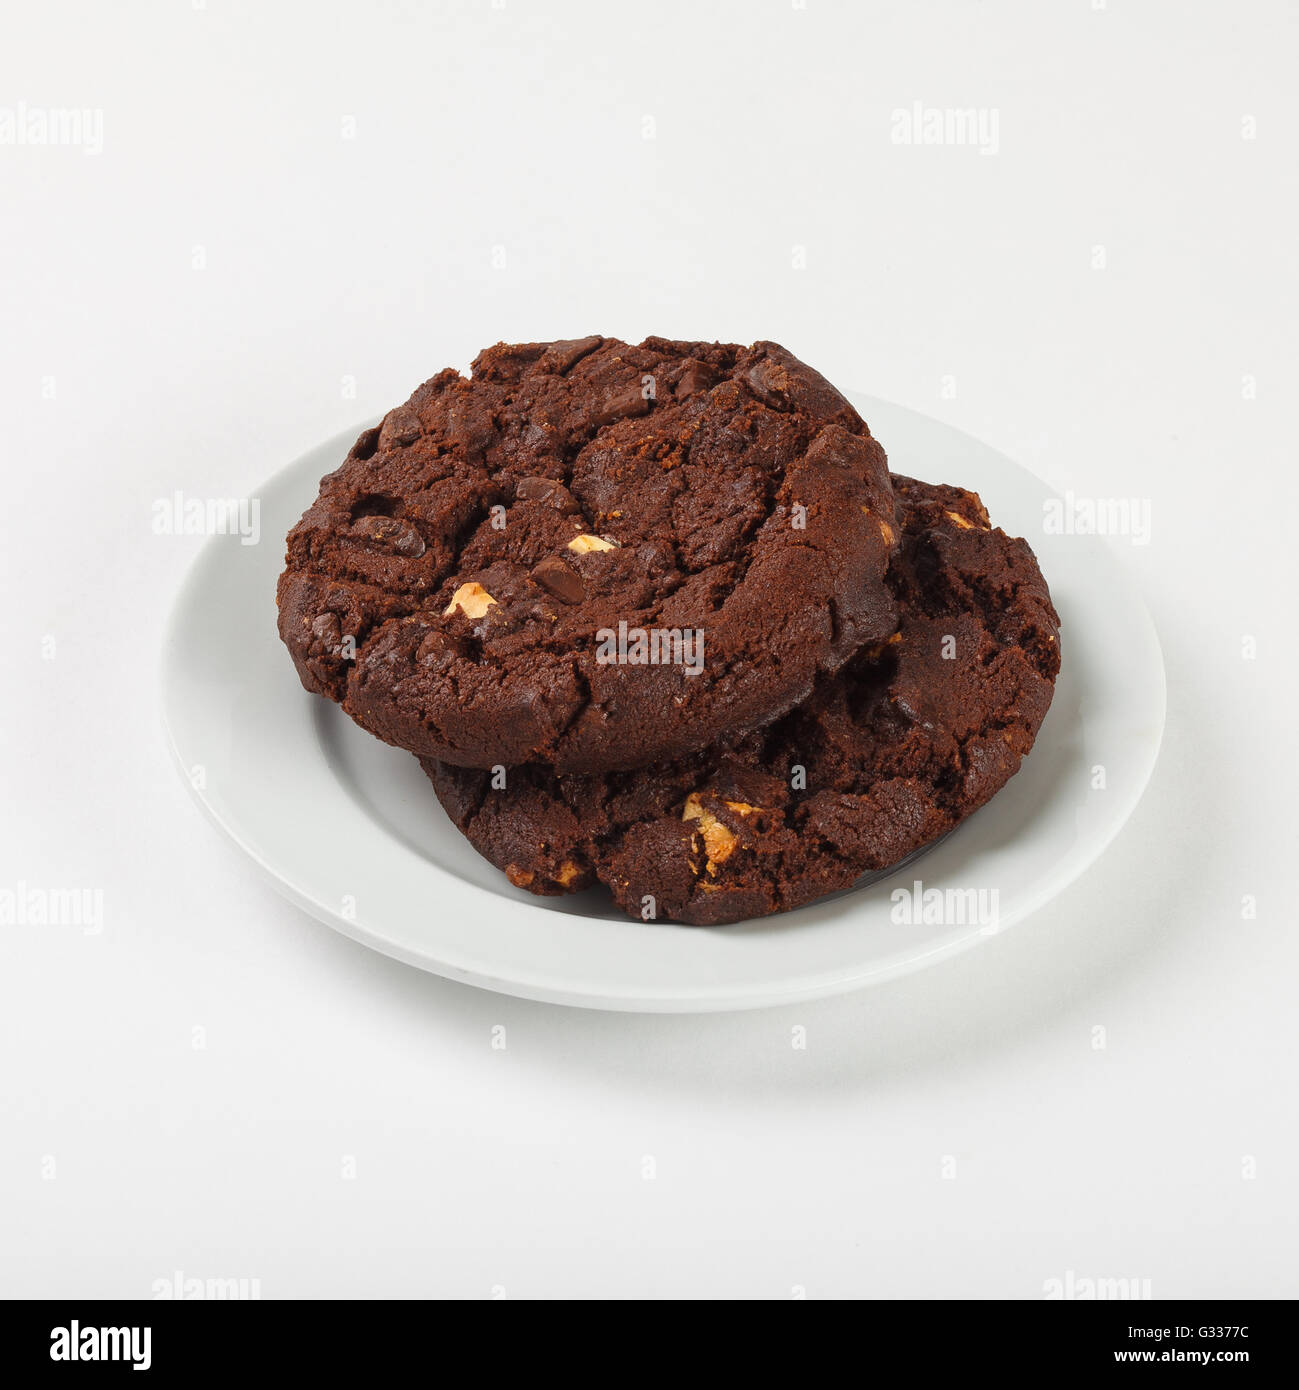 Delicious biscuit cookies with chocolate chips on the plate on white background. Close up side view. Stock Photo